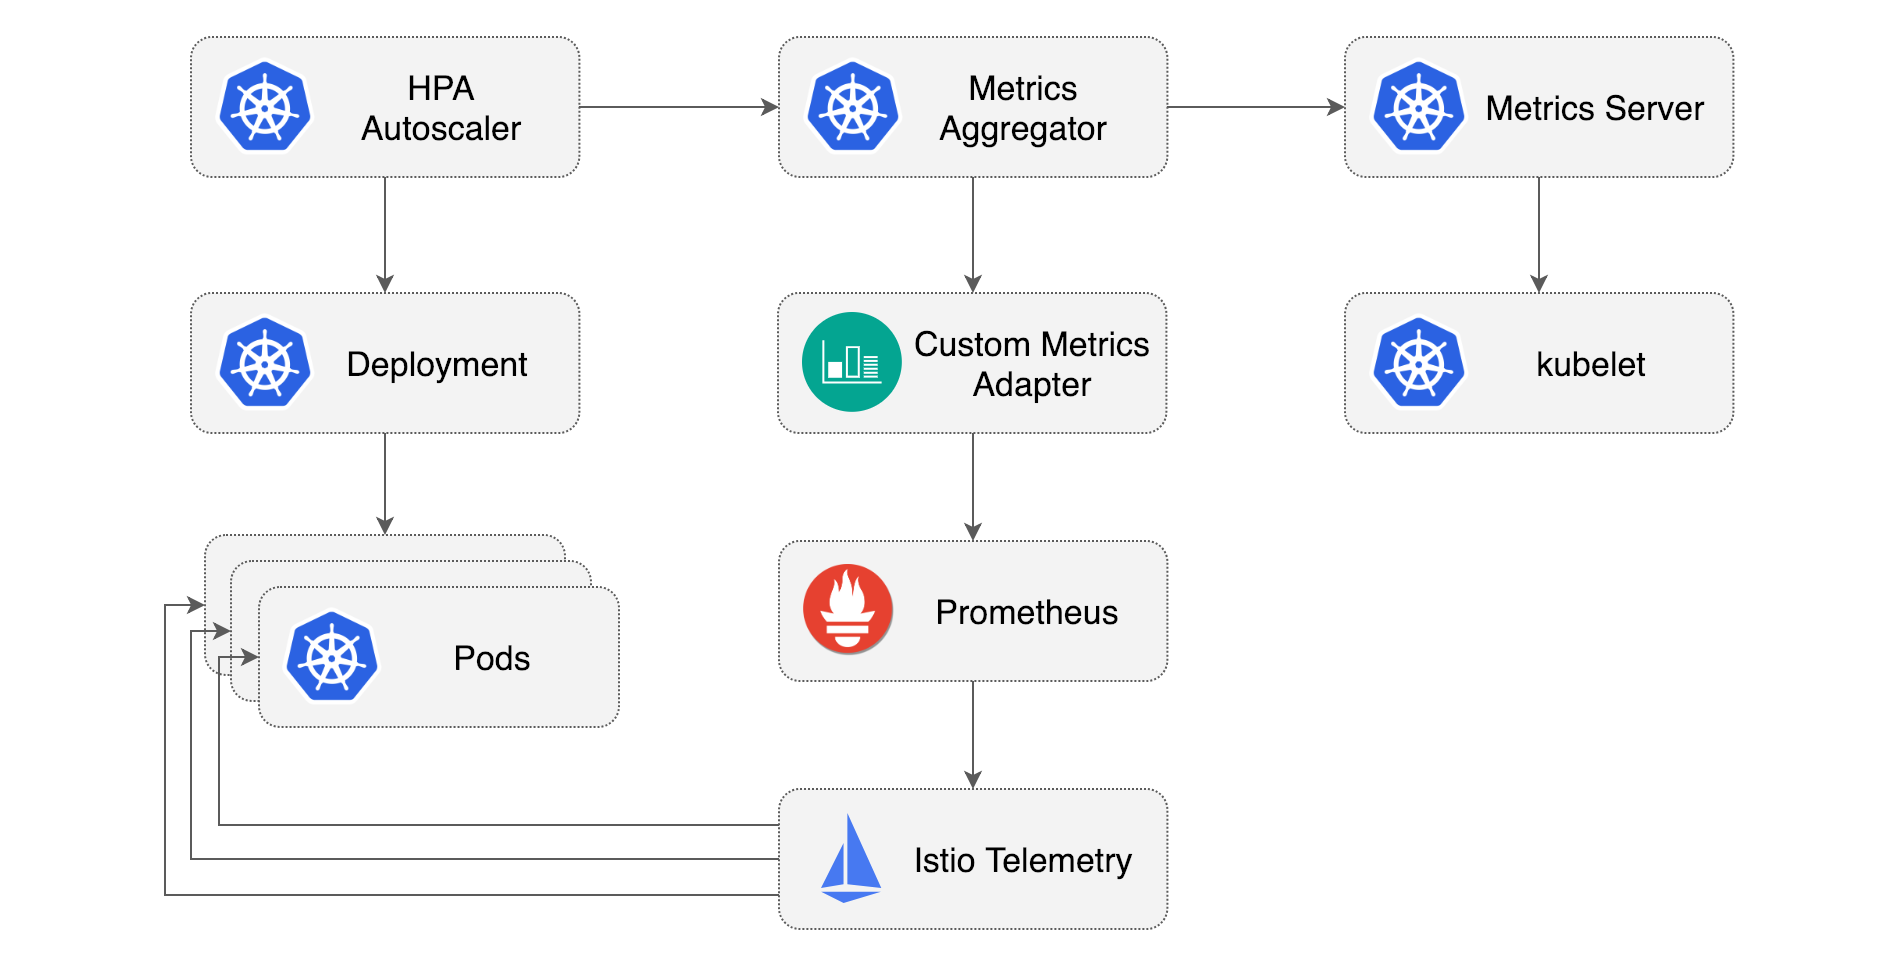 The whole picture of HPA by Istio metrics